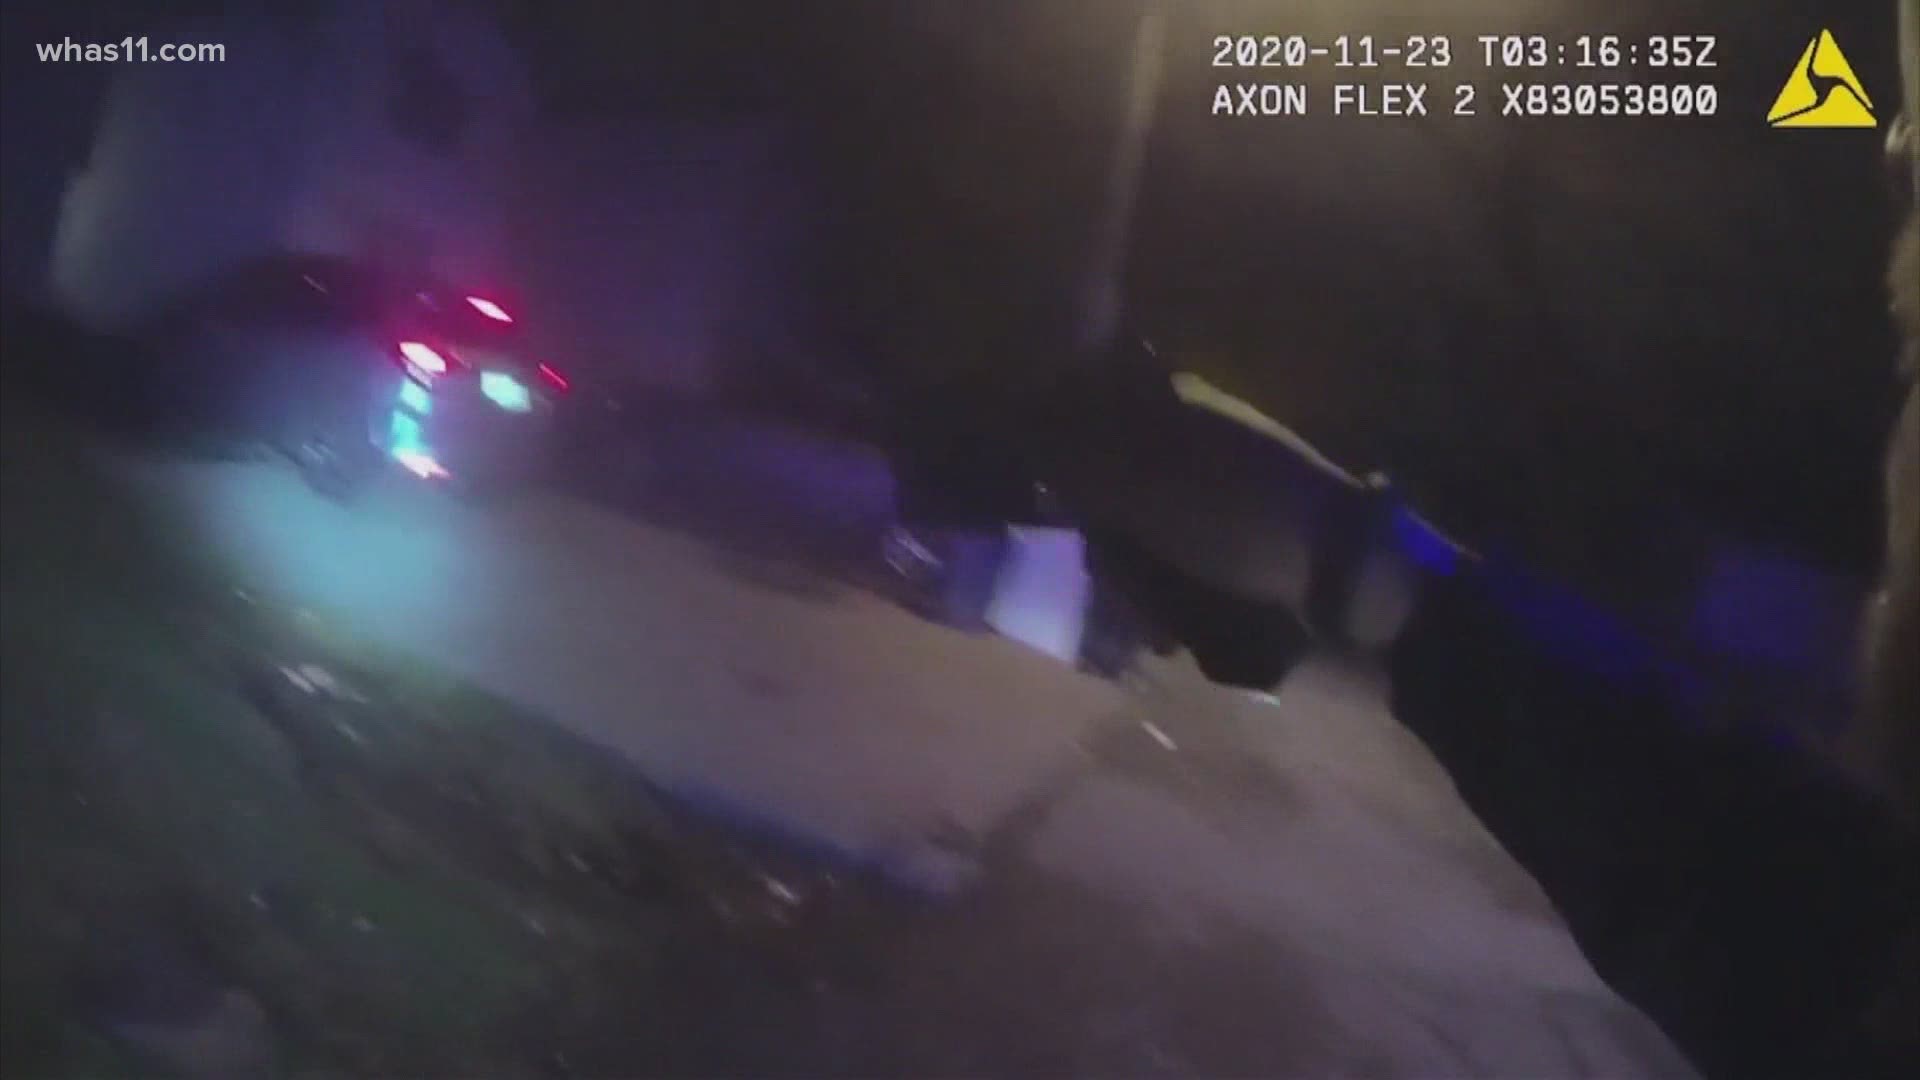 Kentucky State Police have released body camera footage from a shooting involving the Louisville Metro Police Department on Sunday, Nov. 22.